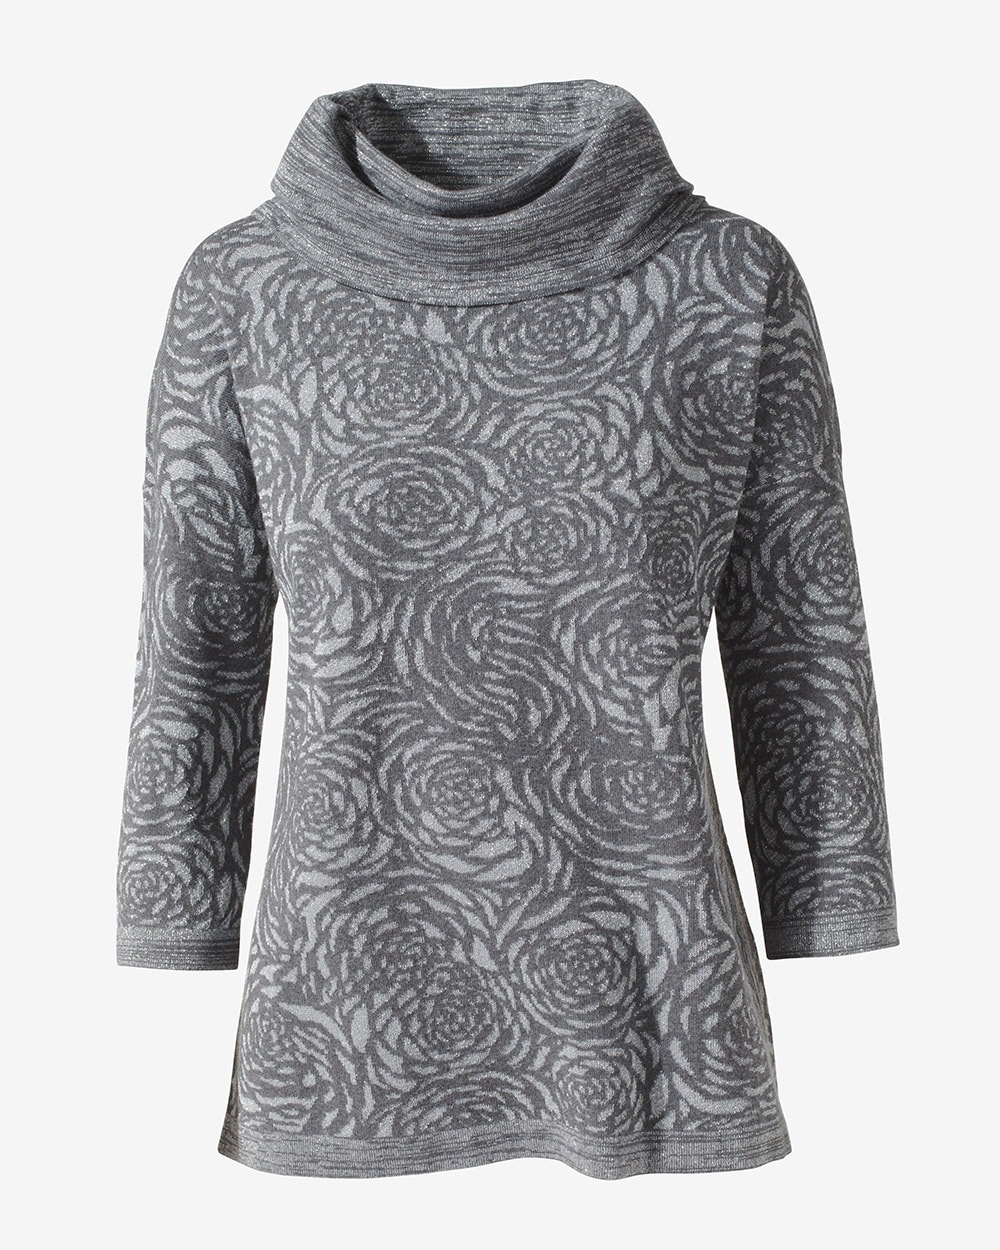 Weekends Rose Jacquard Cowl-Neck Tunic